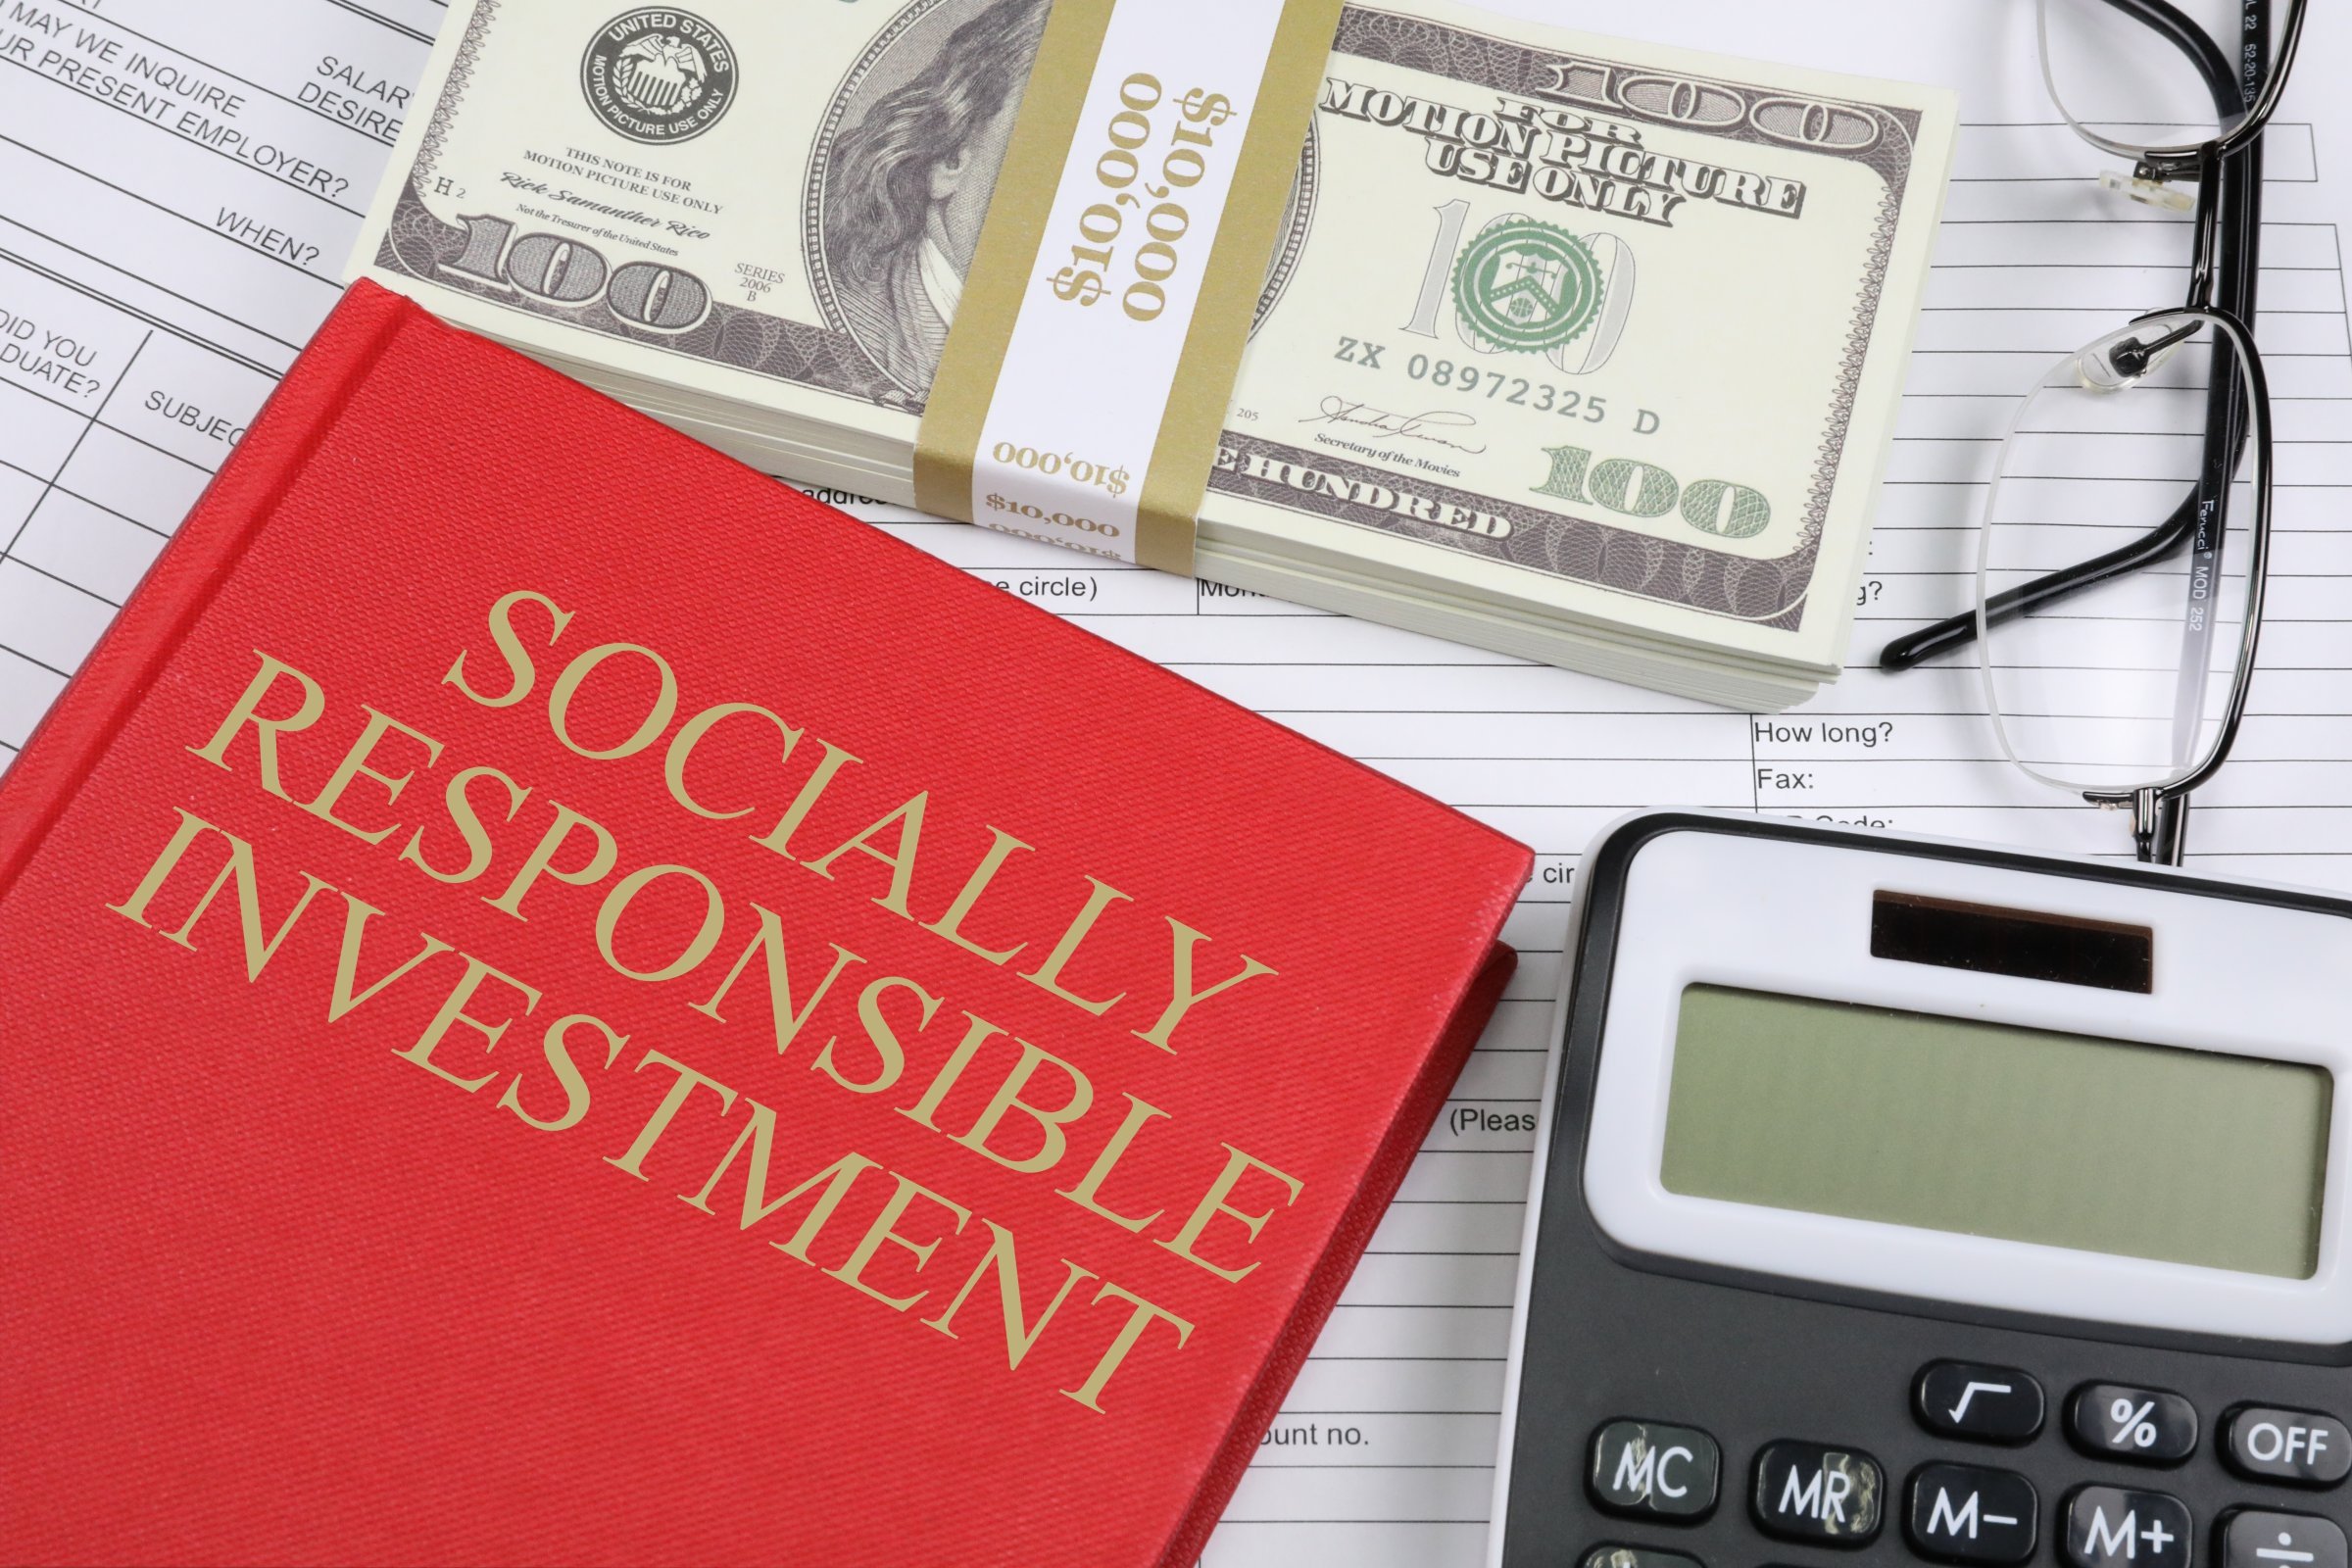 socially responsible investment